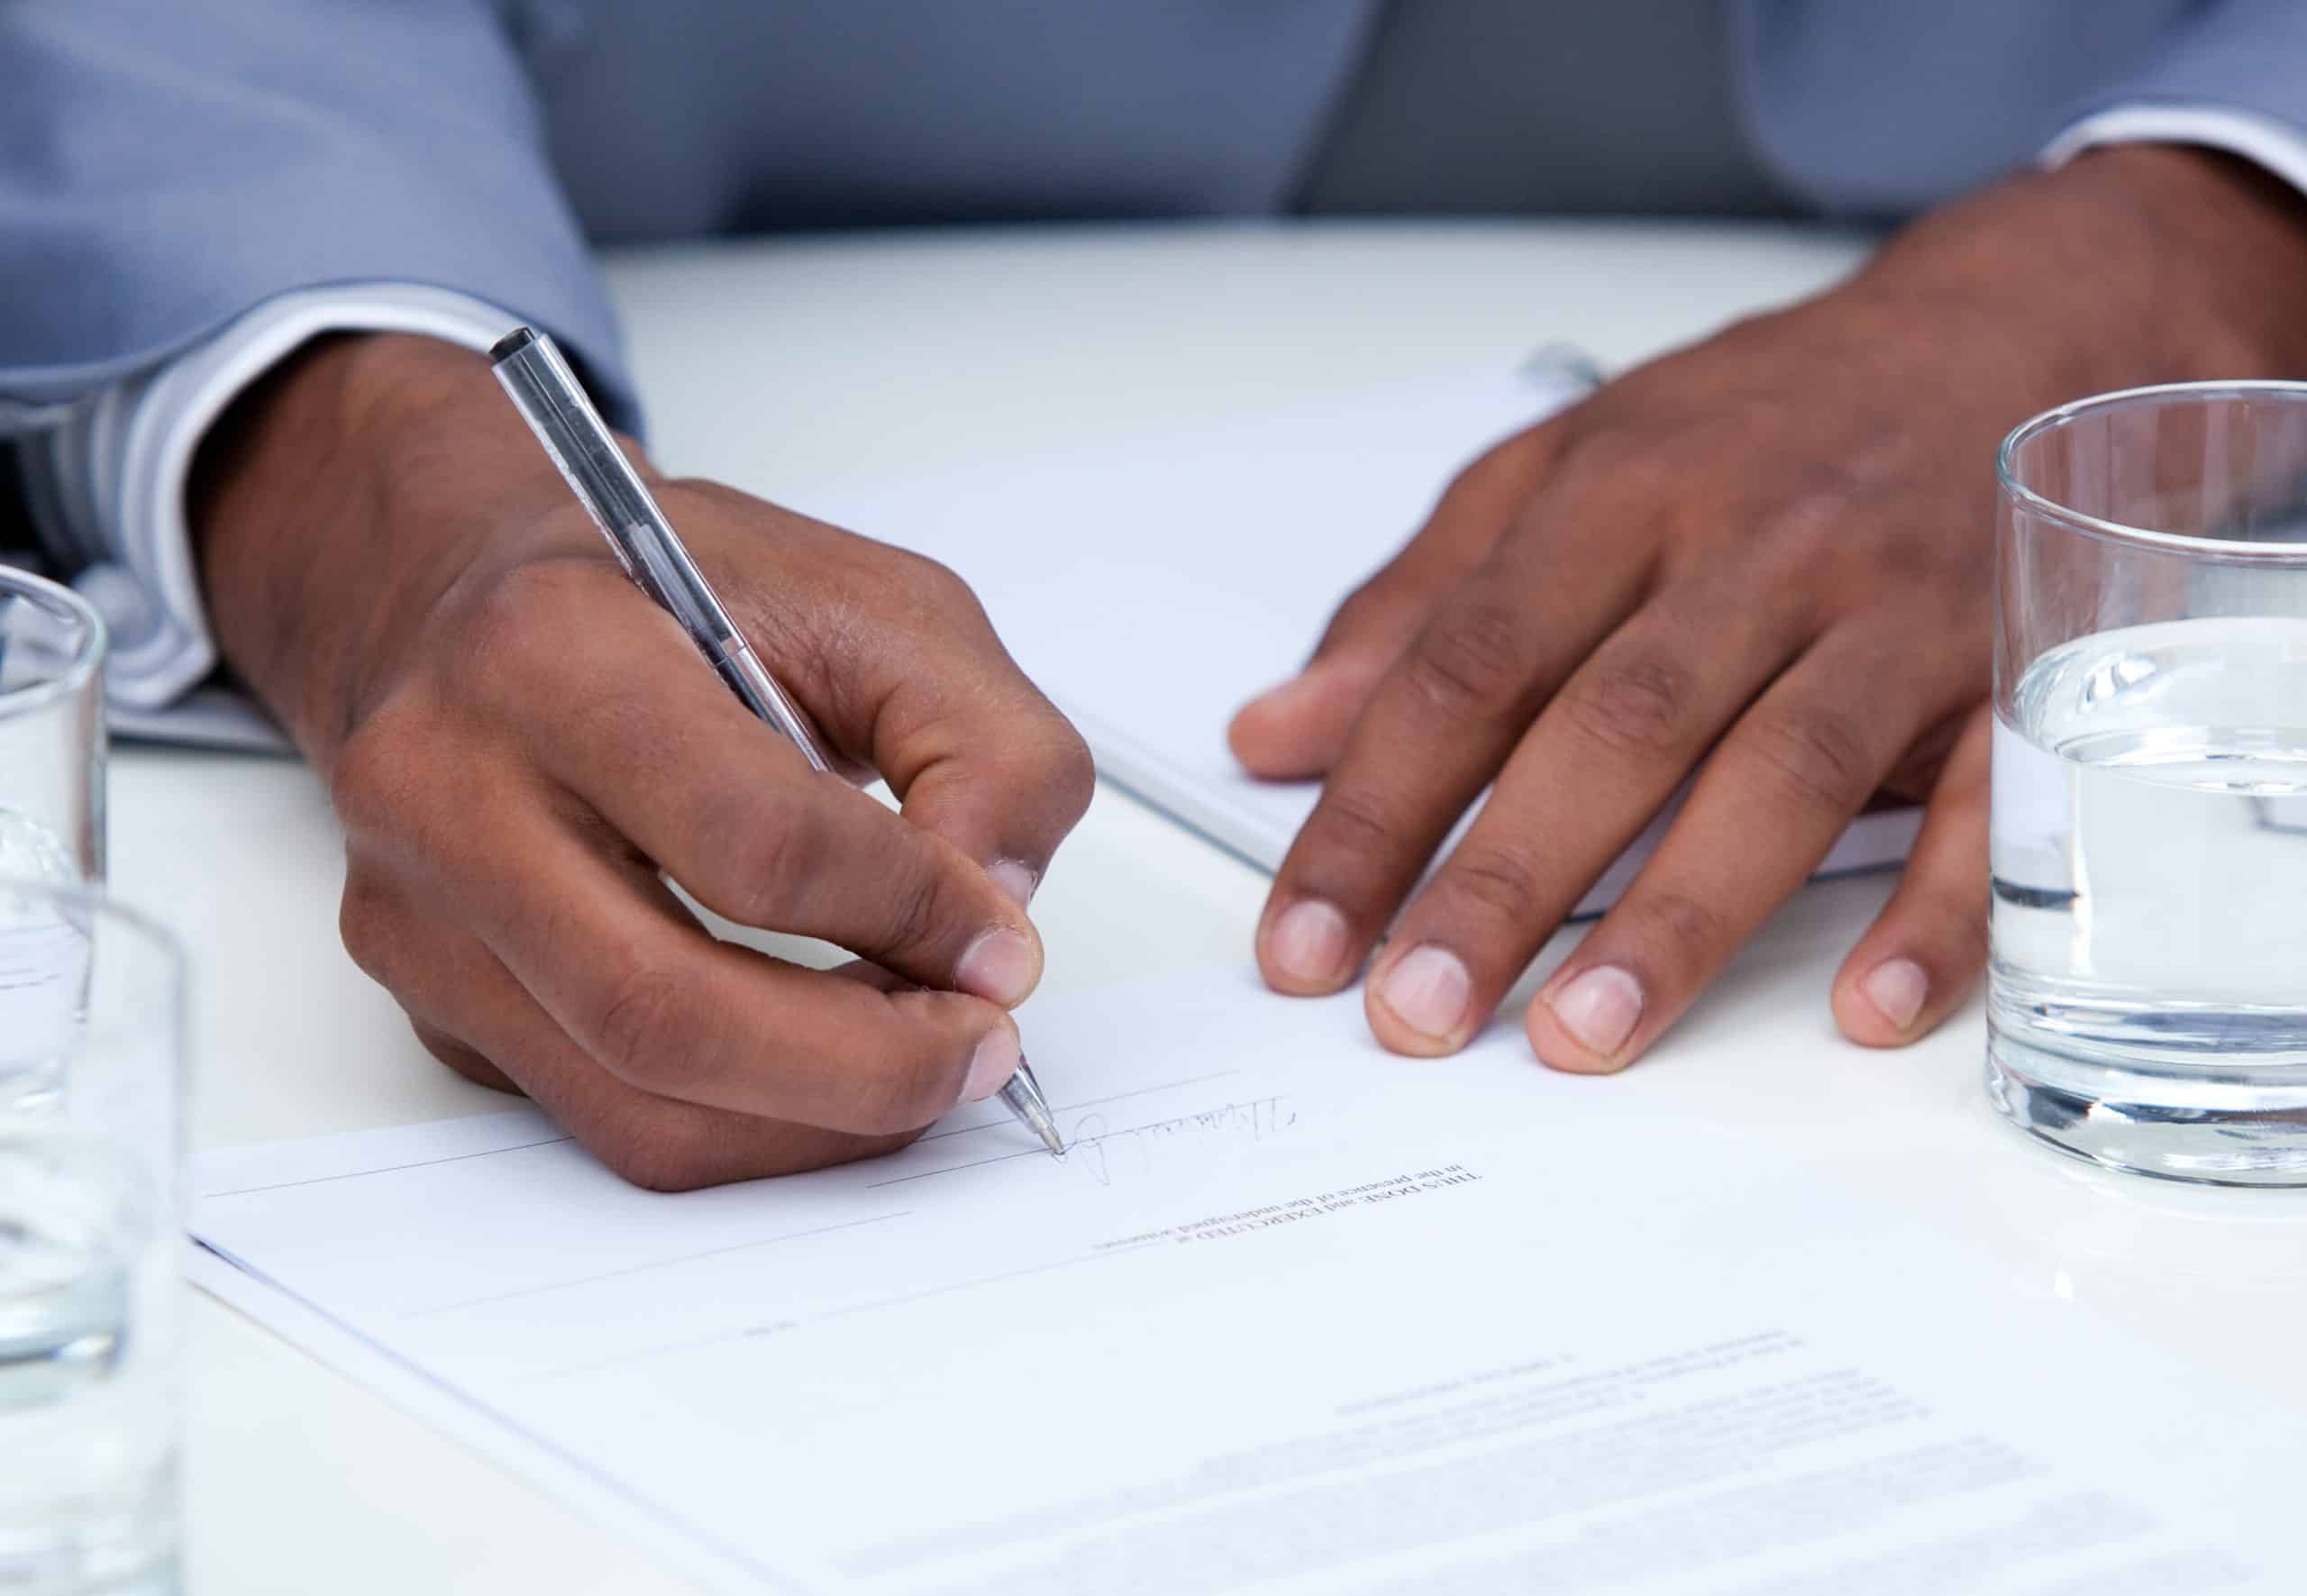 A man signs legal documents